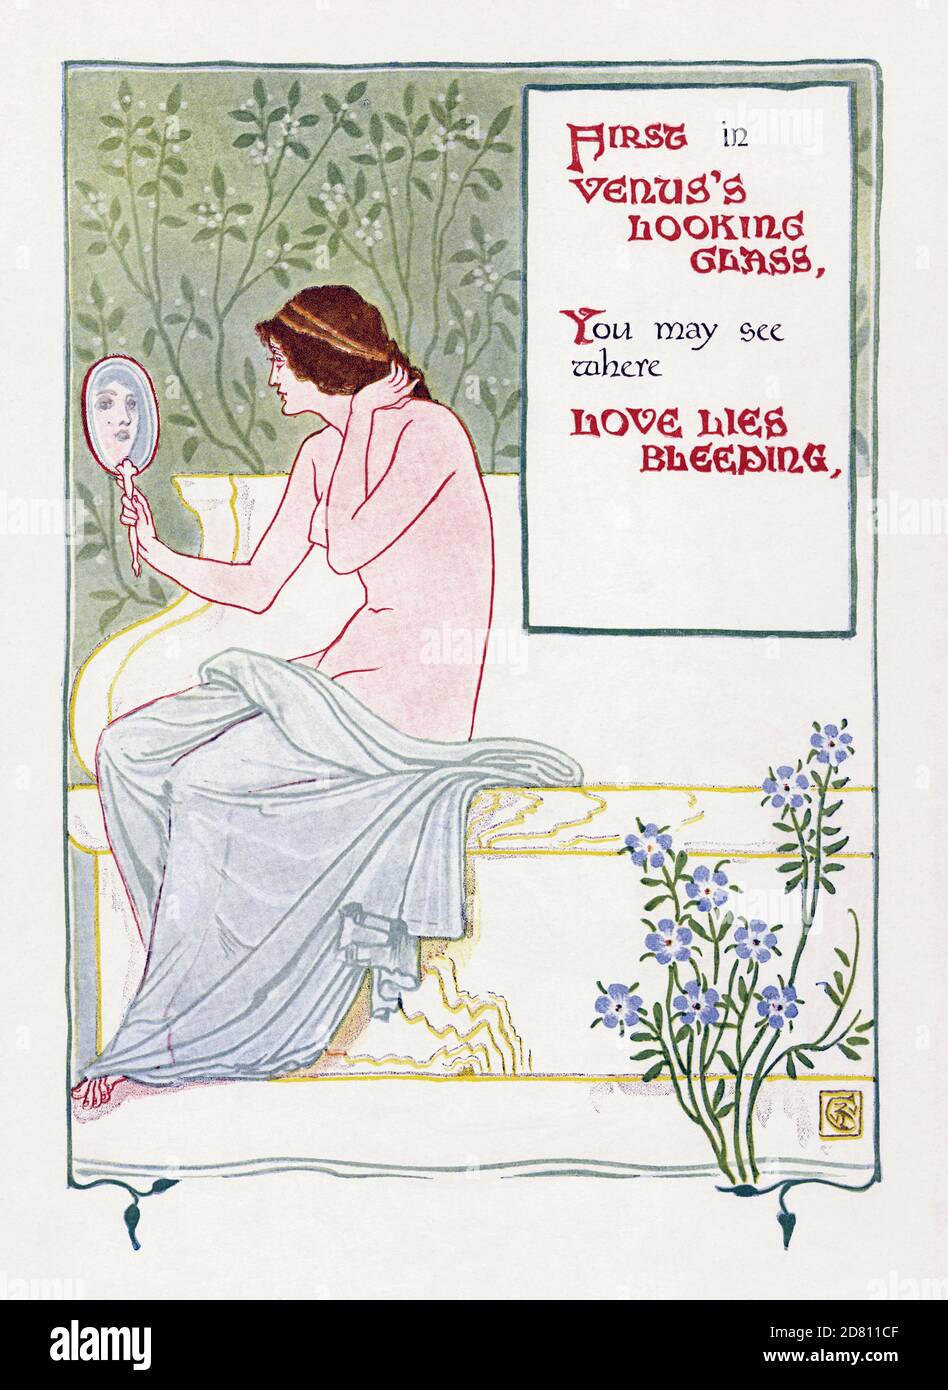 ”First in Venus’s looking glass, you may see where love lies bleeding”.  An illustration by British artist Walter Crane used in his book A Floral Fantasy in an Old English Garden, published in New York, 1899. Stock Photo